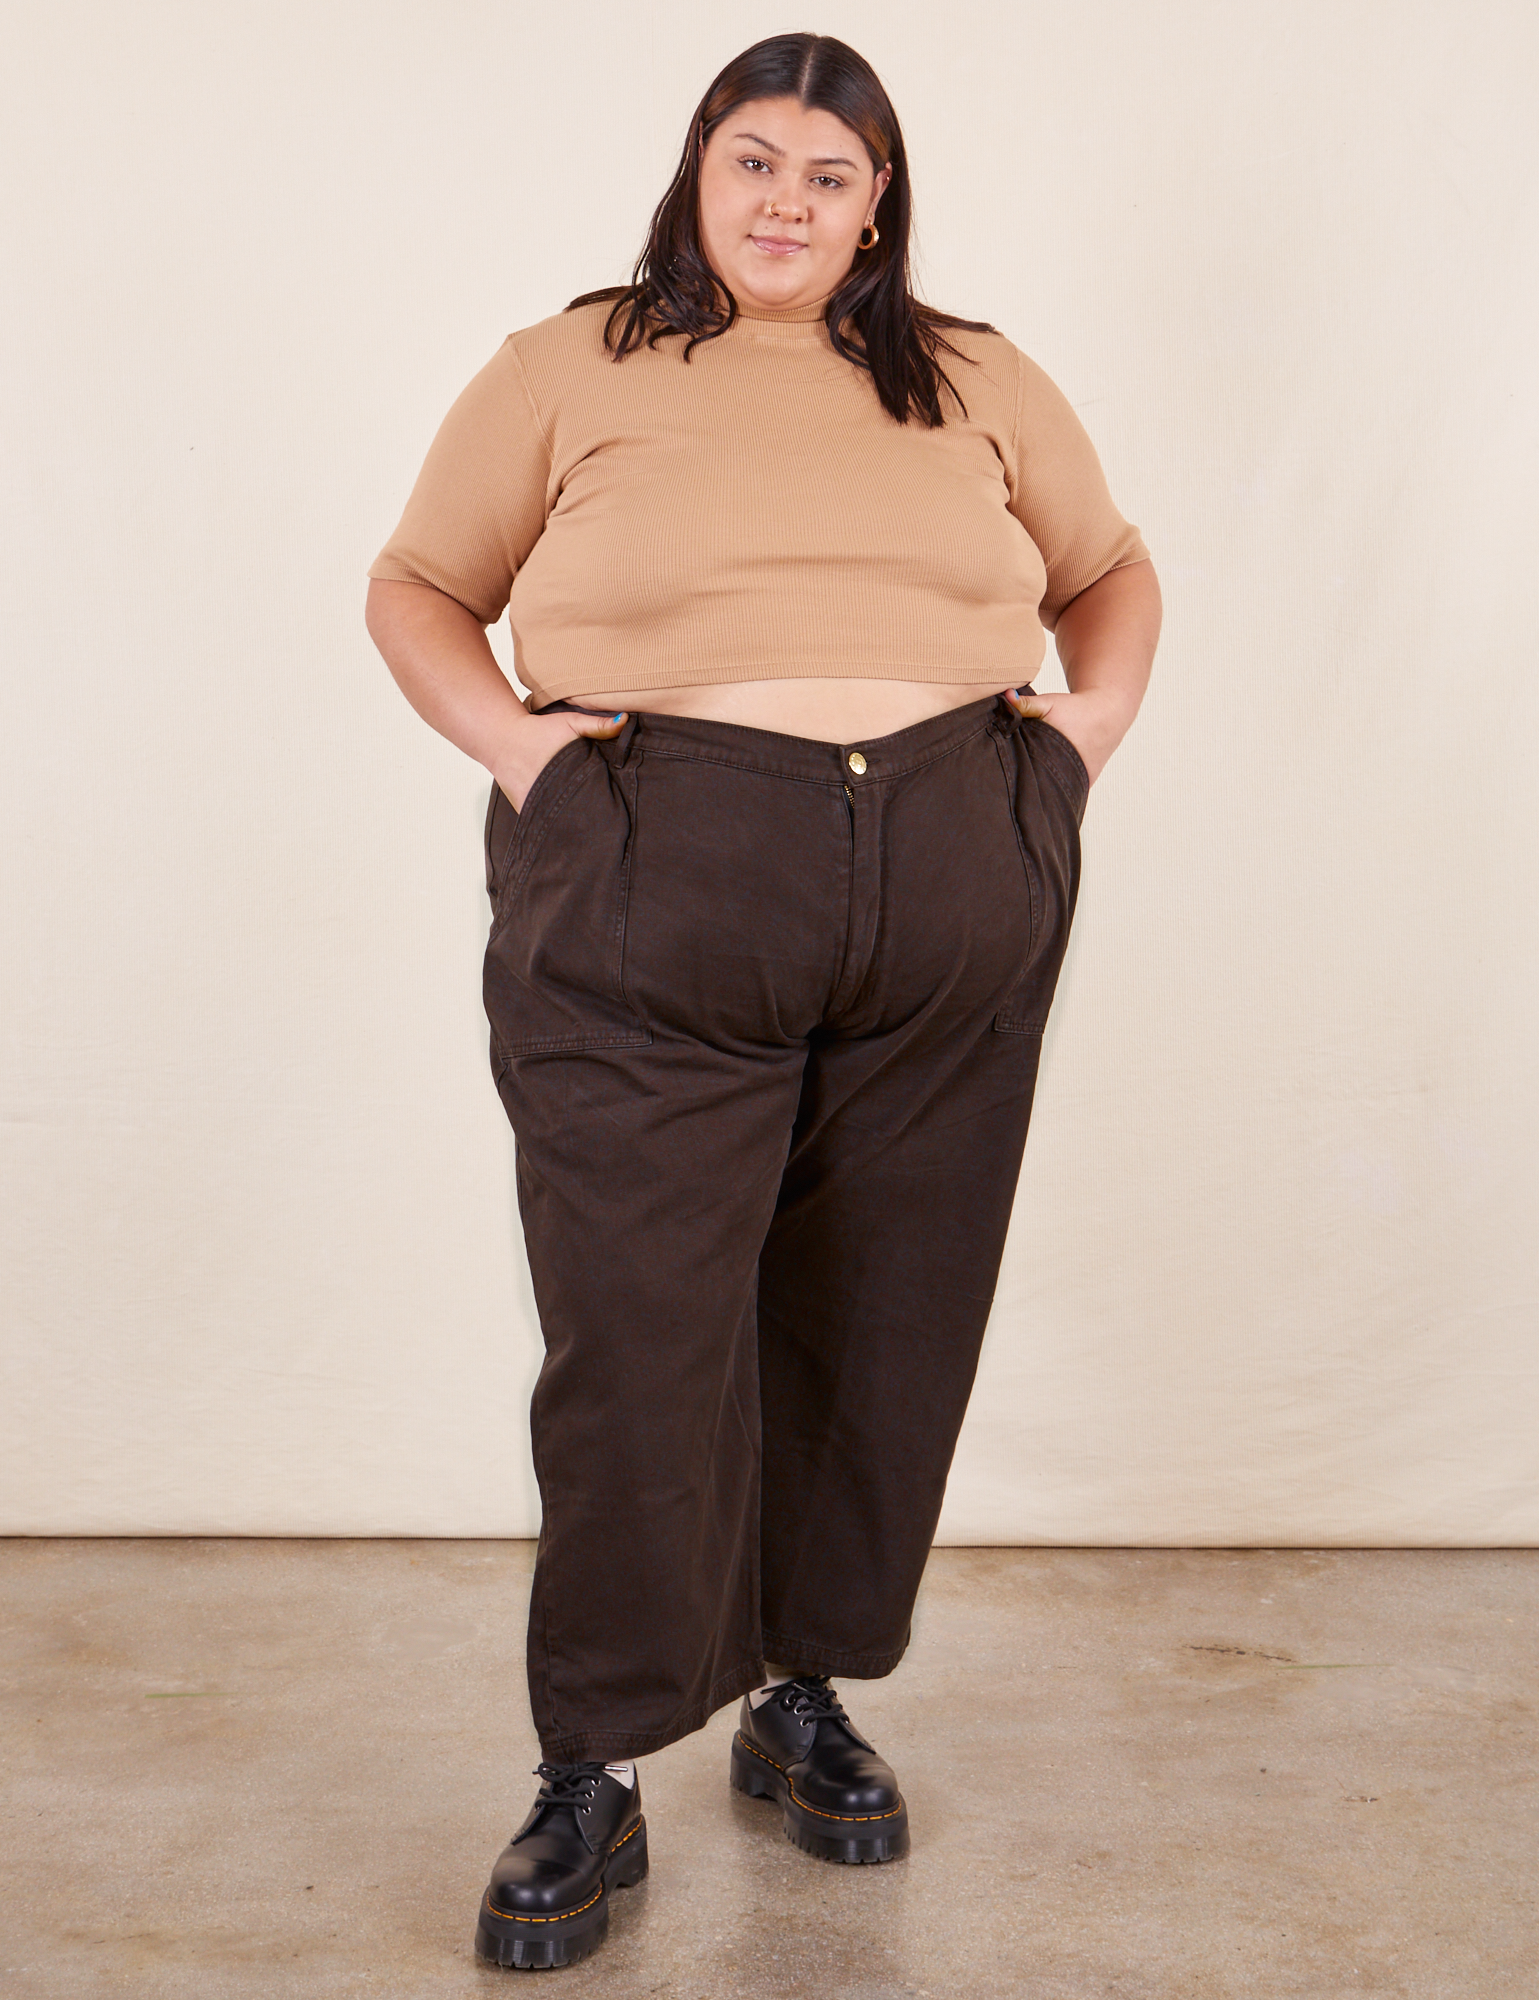 Sarita is 5&#39;7&quot; and wearing Petite 4XL Work Pants in Espresso Brown paired with 1/2 Sleeve Turtleneck in Tan